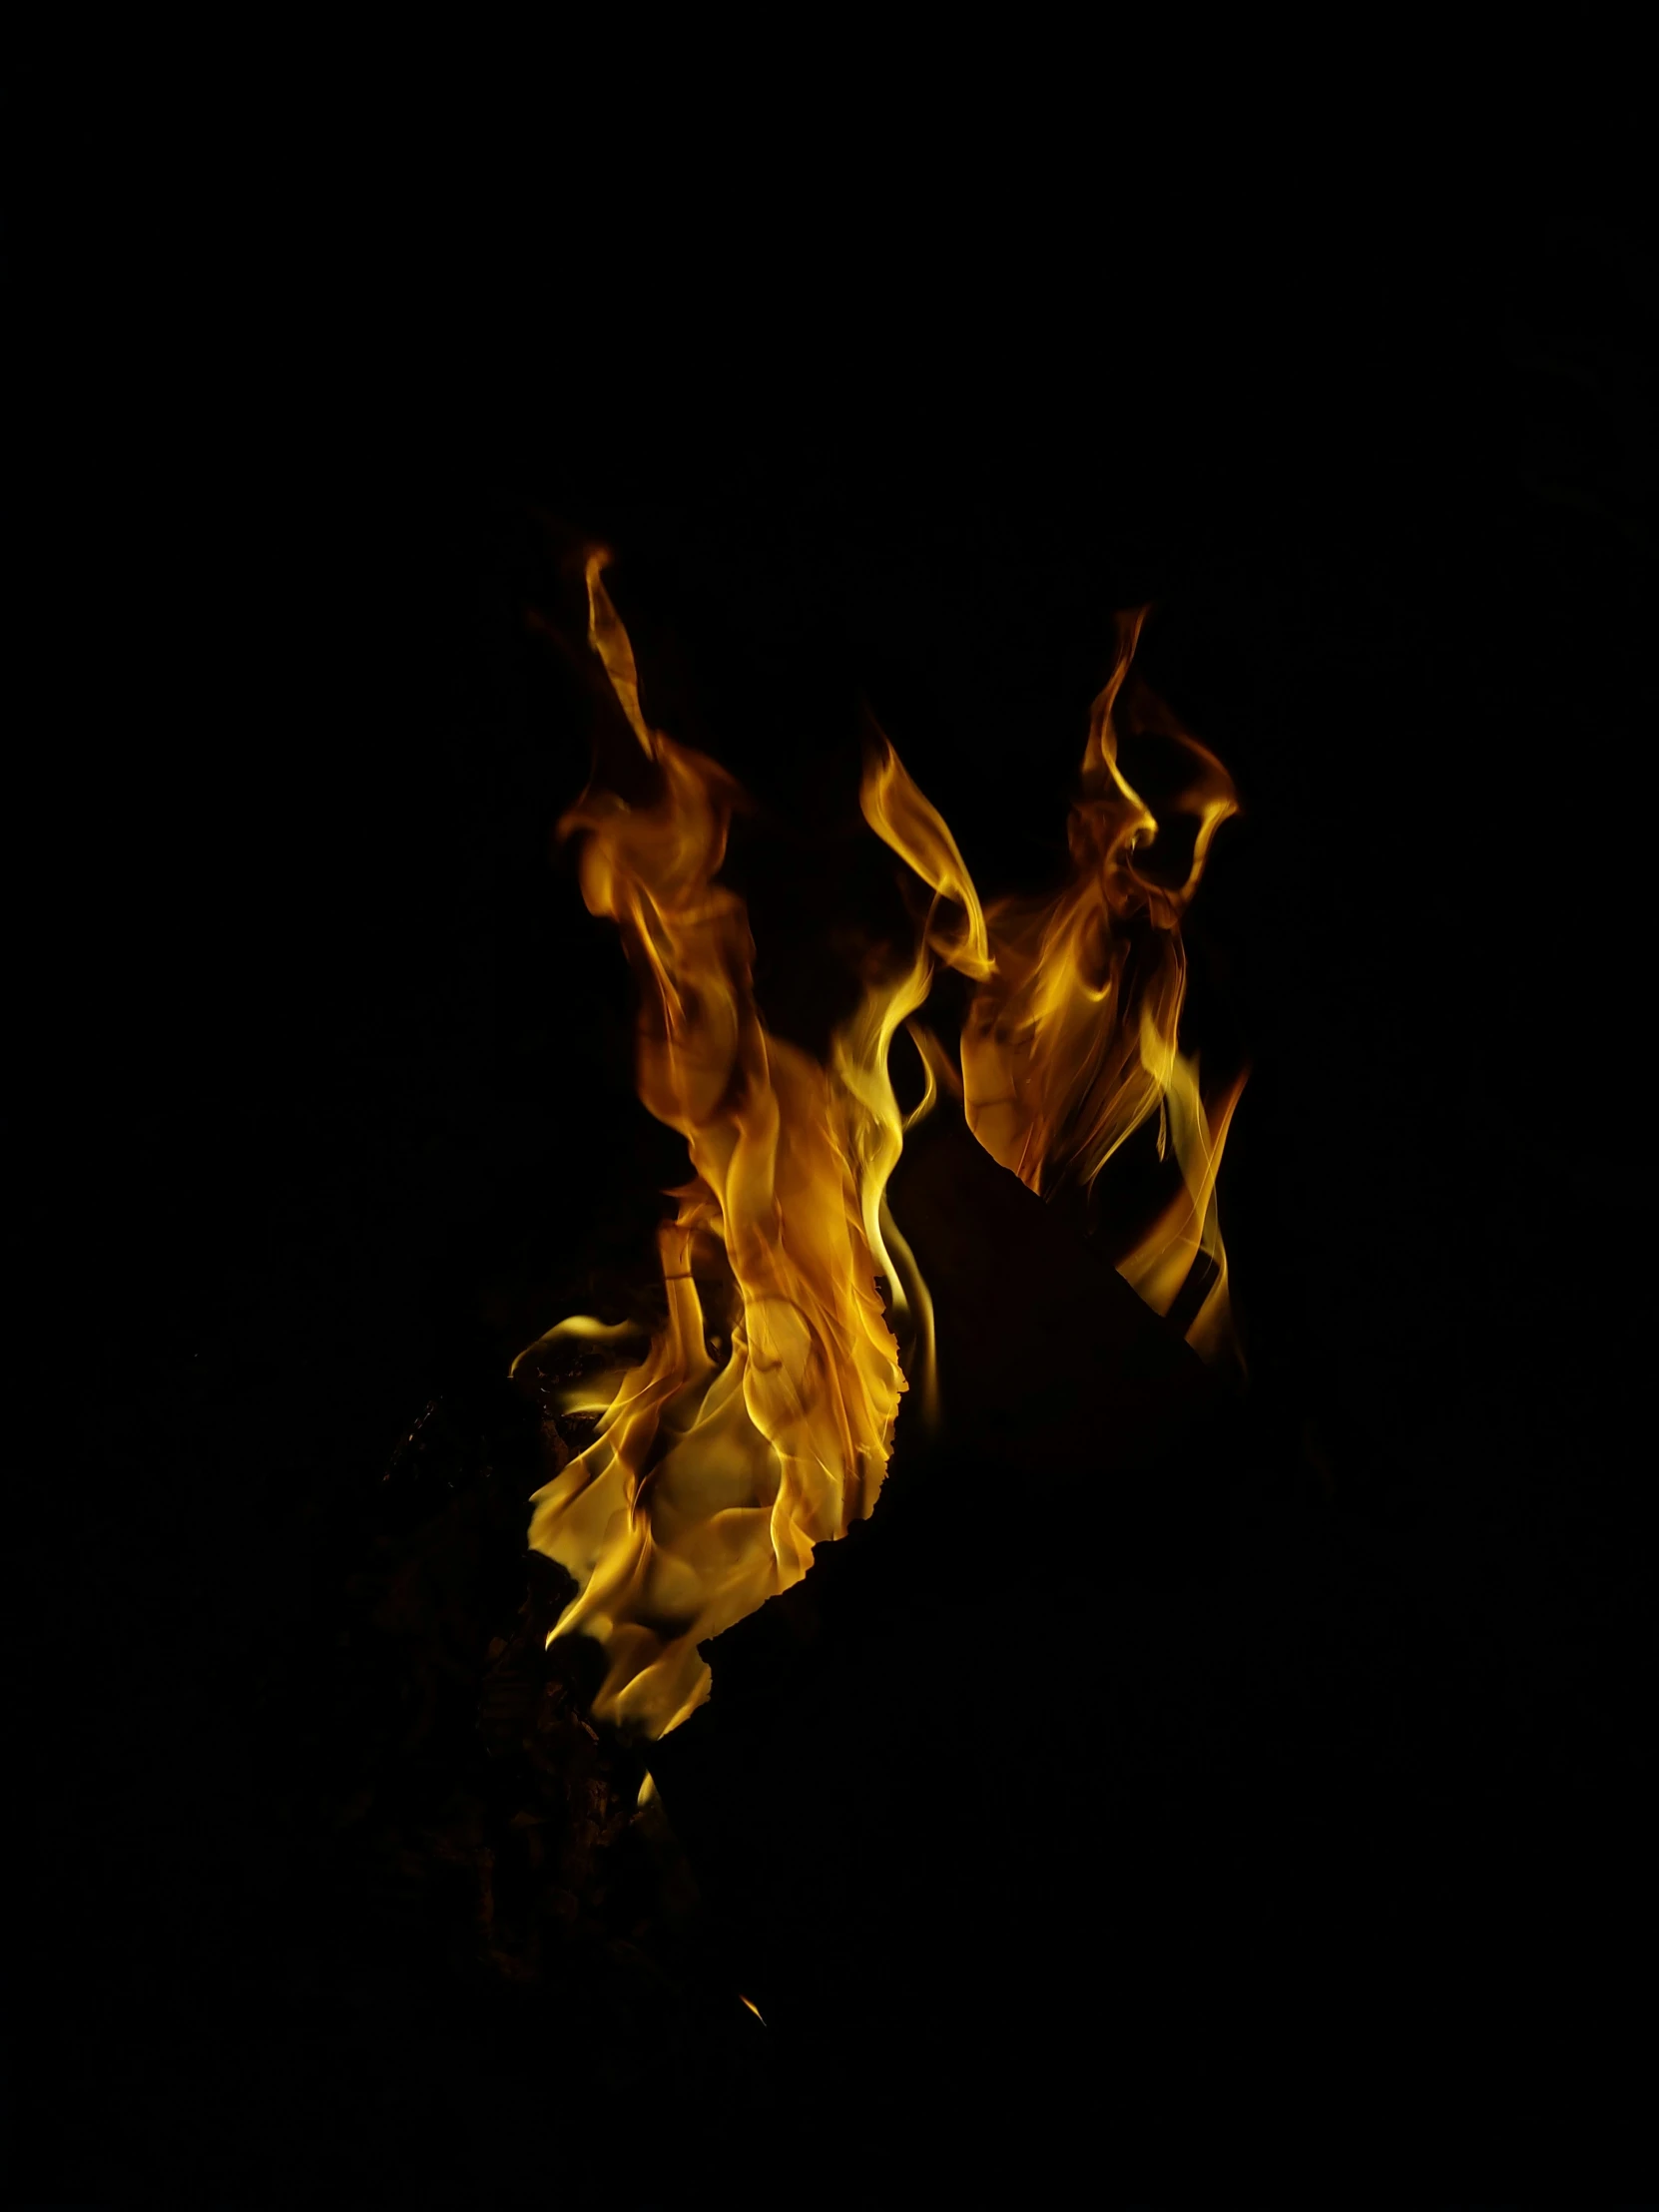 the fire is glowing in the black night